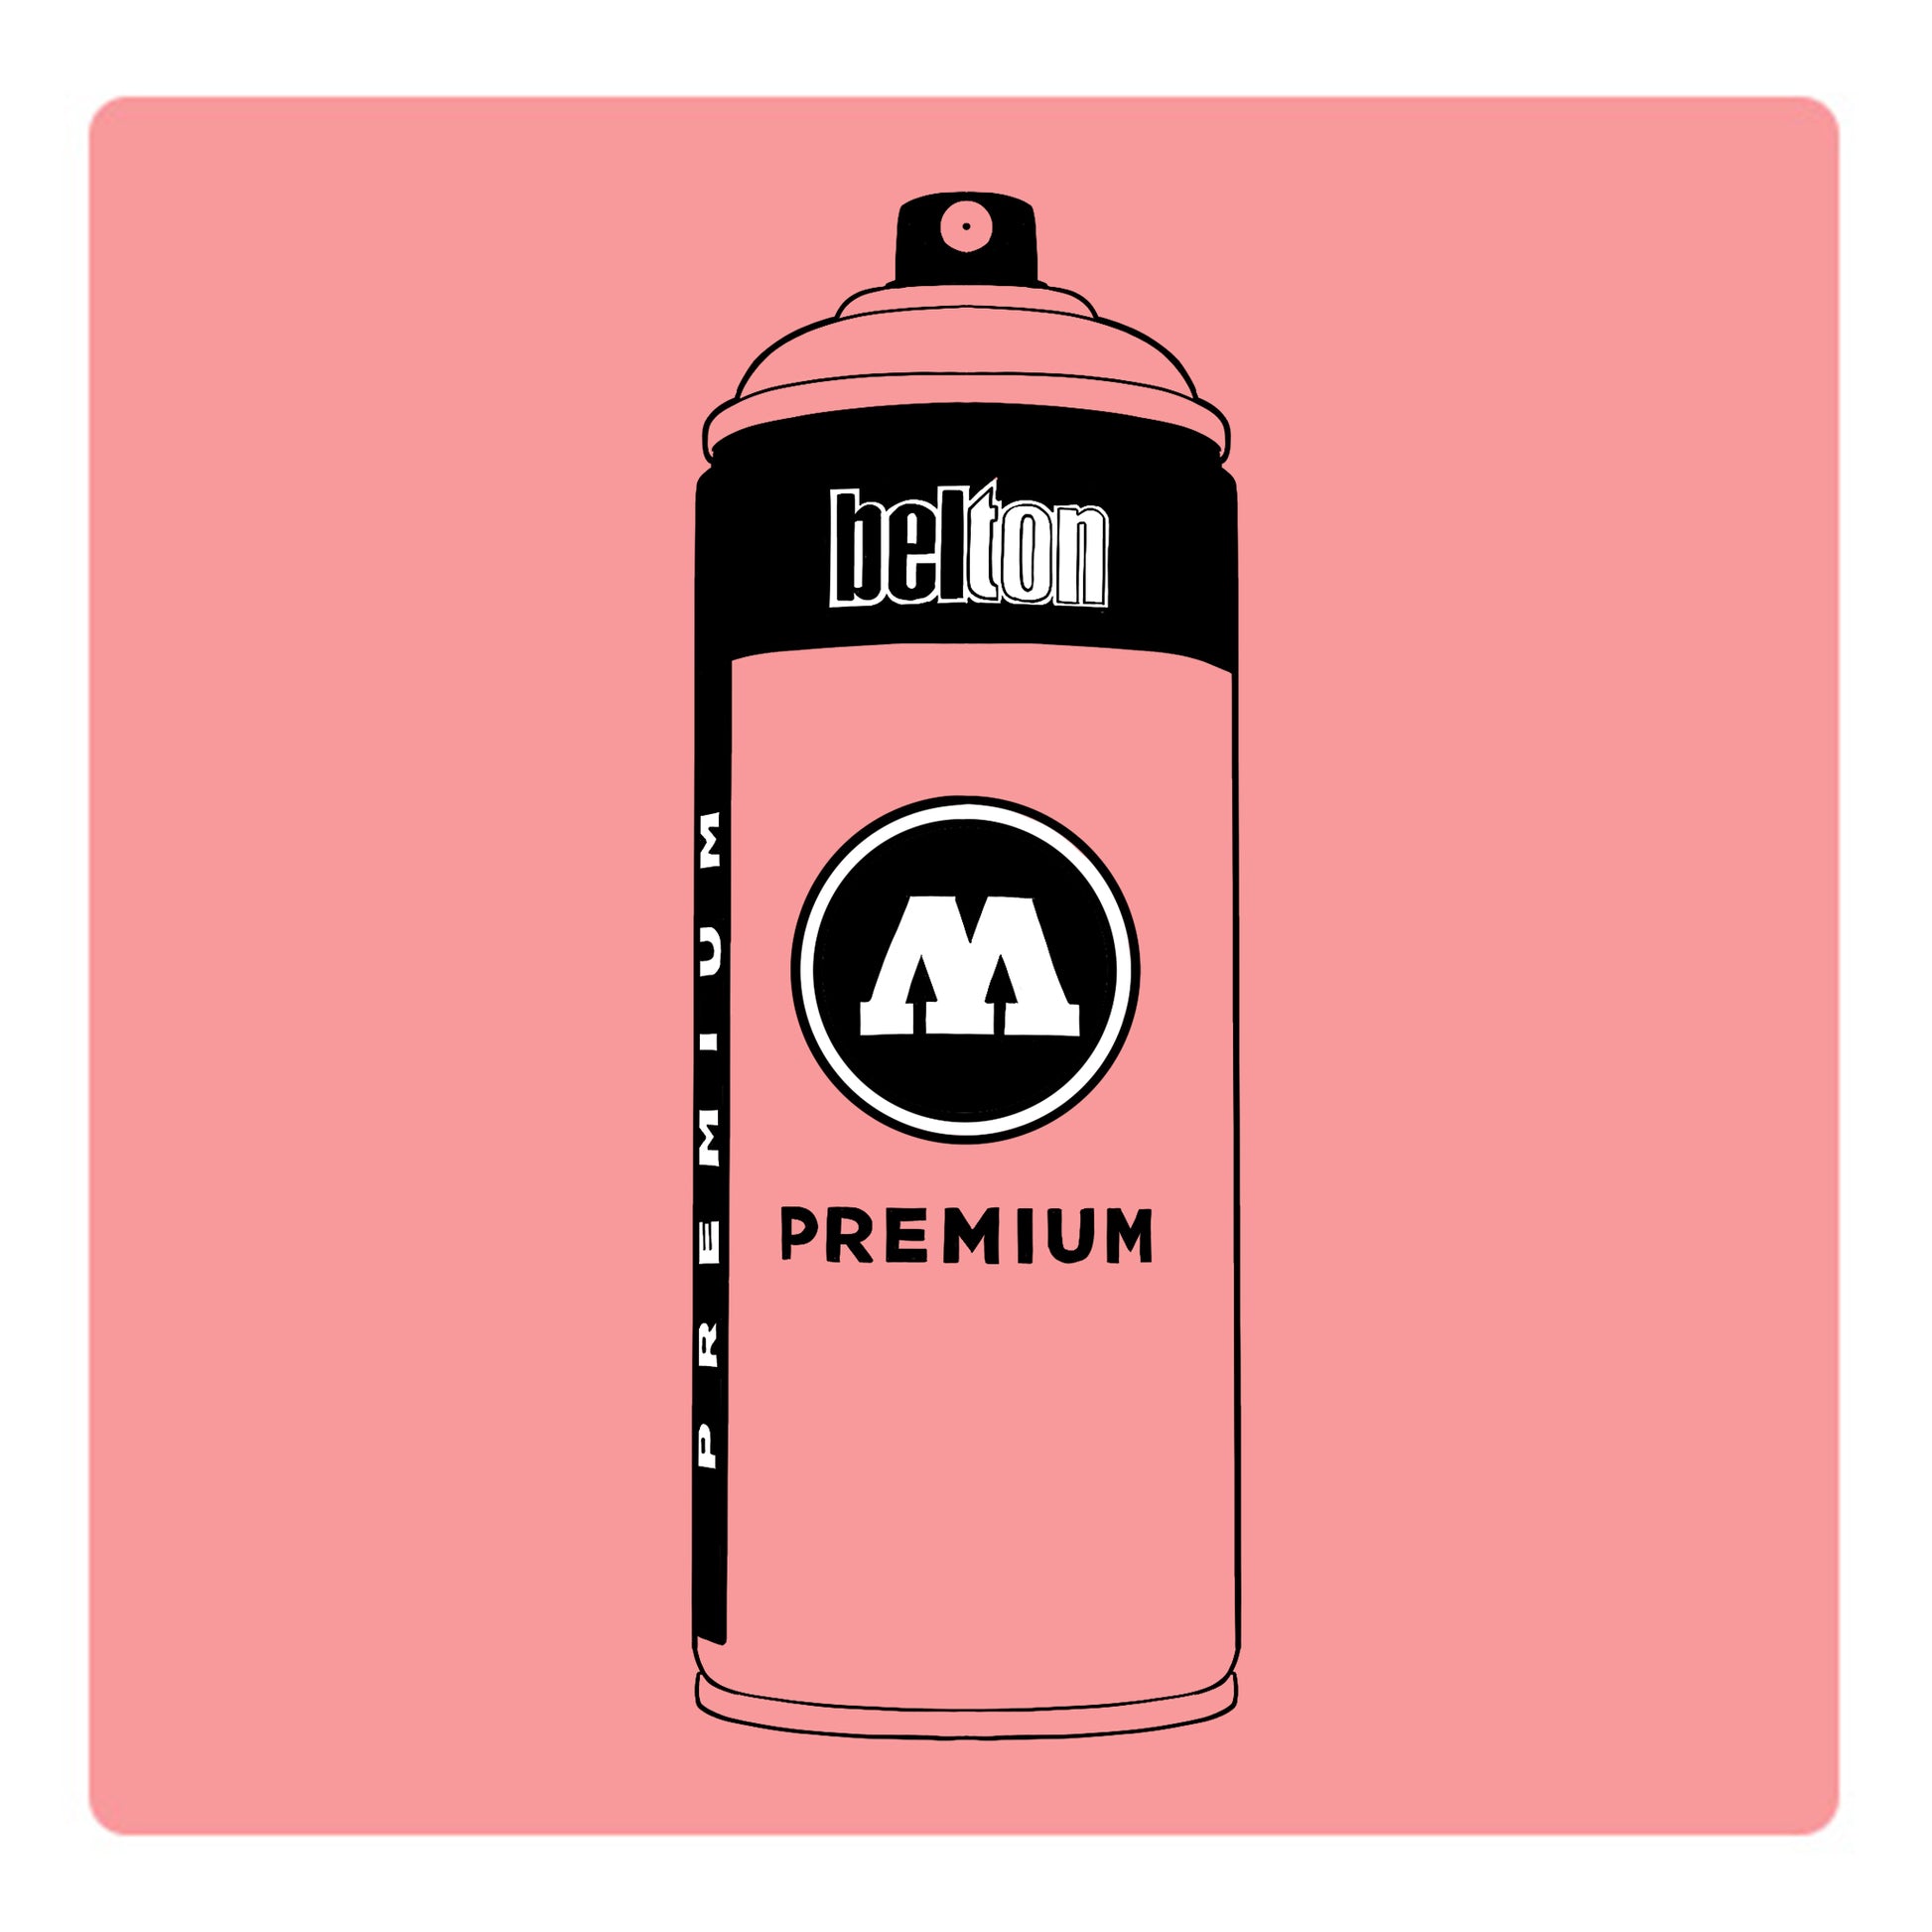 A black outline drawing of a blush pink spray paint can with the words "belton","premium" and the letter"M" written on the face in black and white font. The background is a color swatch of the same blush pink with a white border.